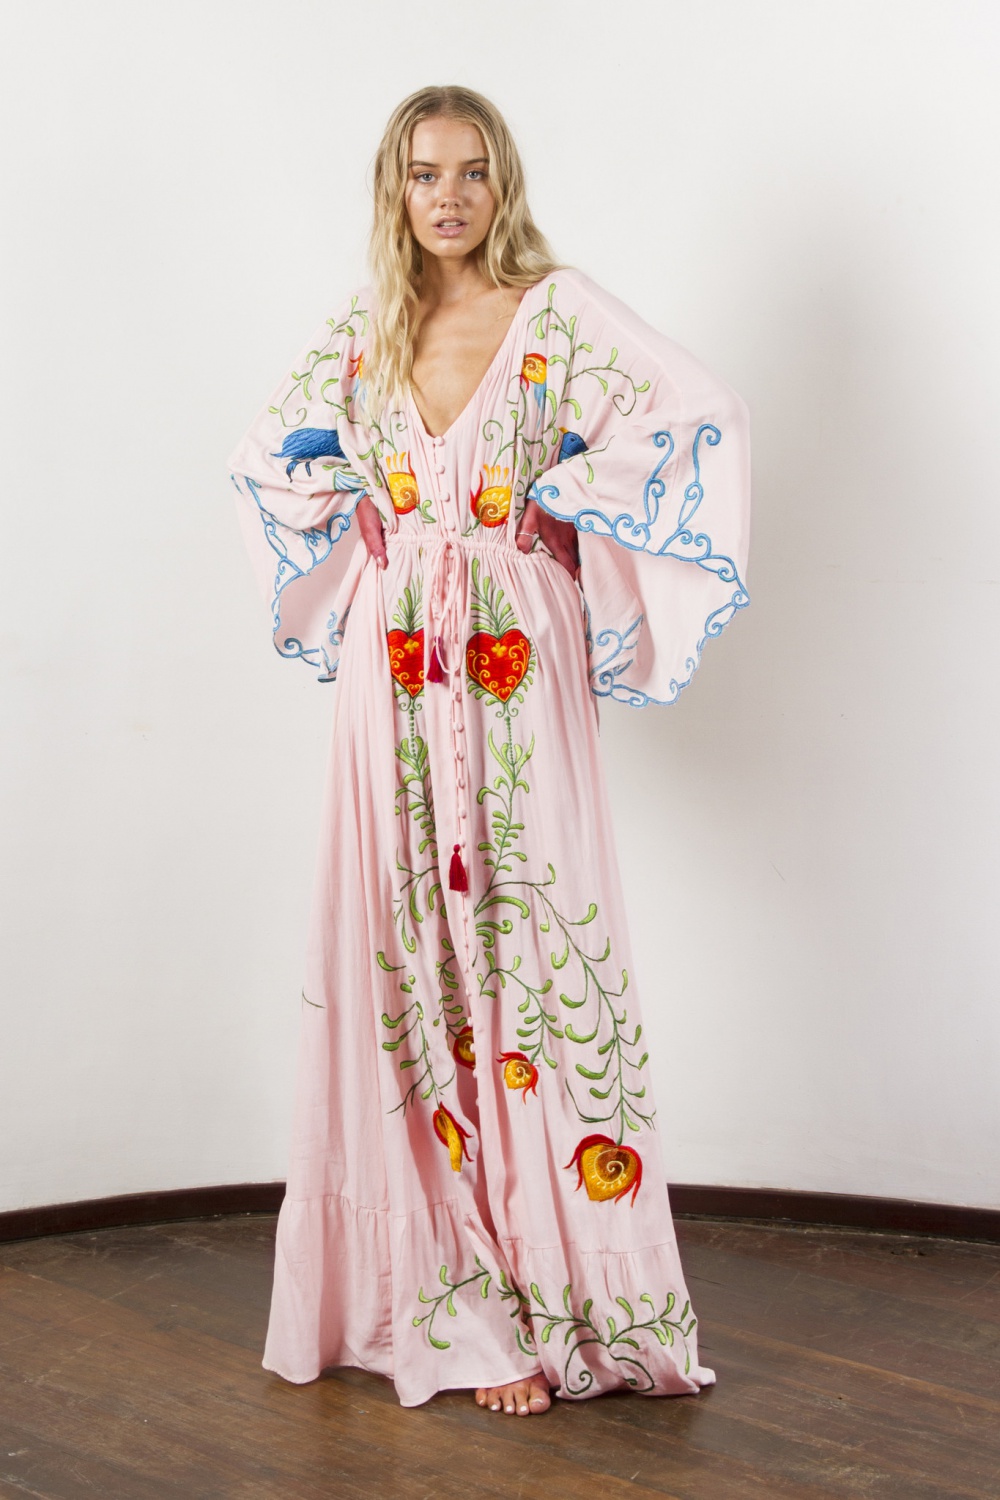 Modeling embroidery flowers long dress